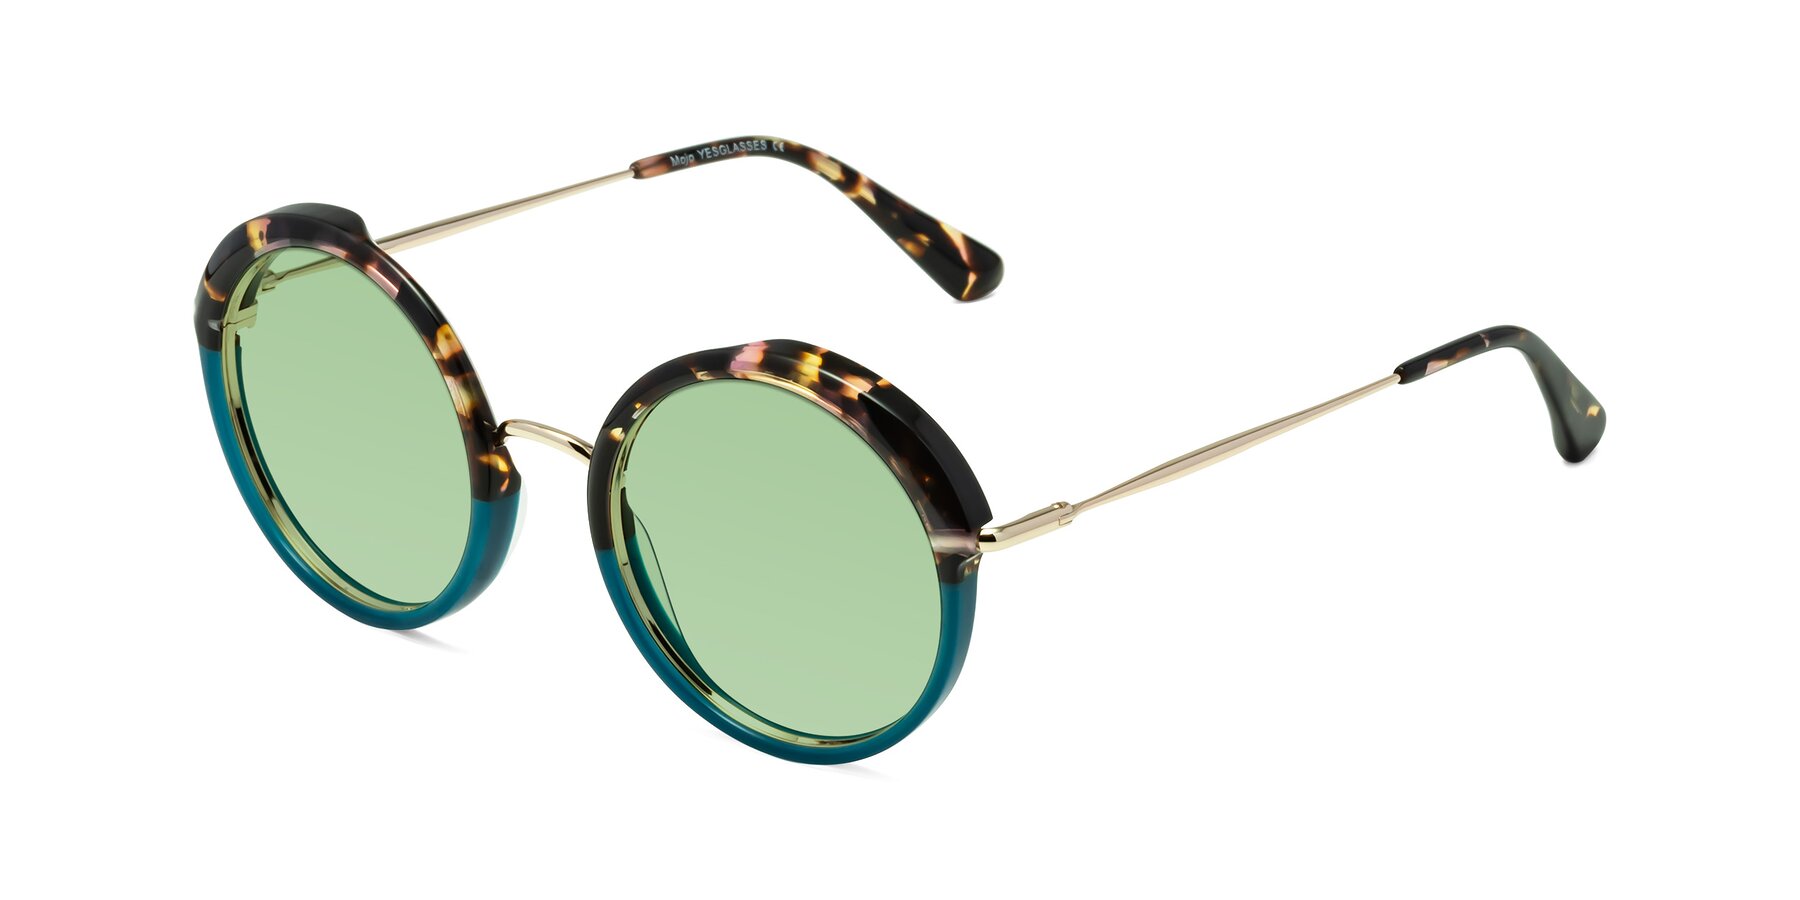 Angle of Mojo in Floral-Teal with Medium Green Tinted Lenses